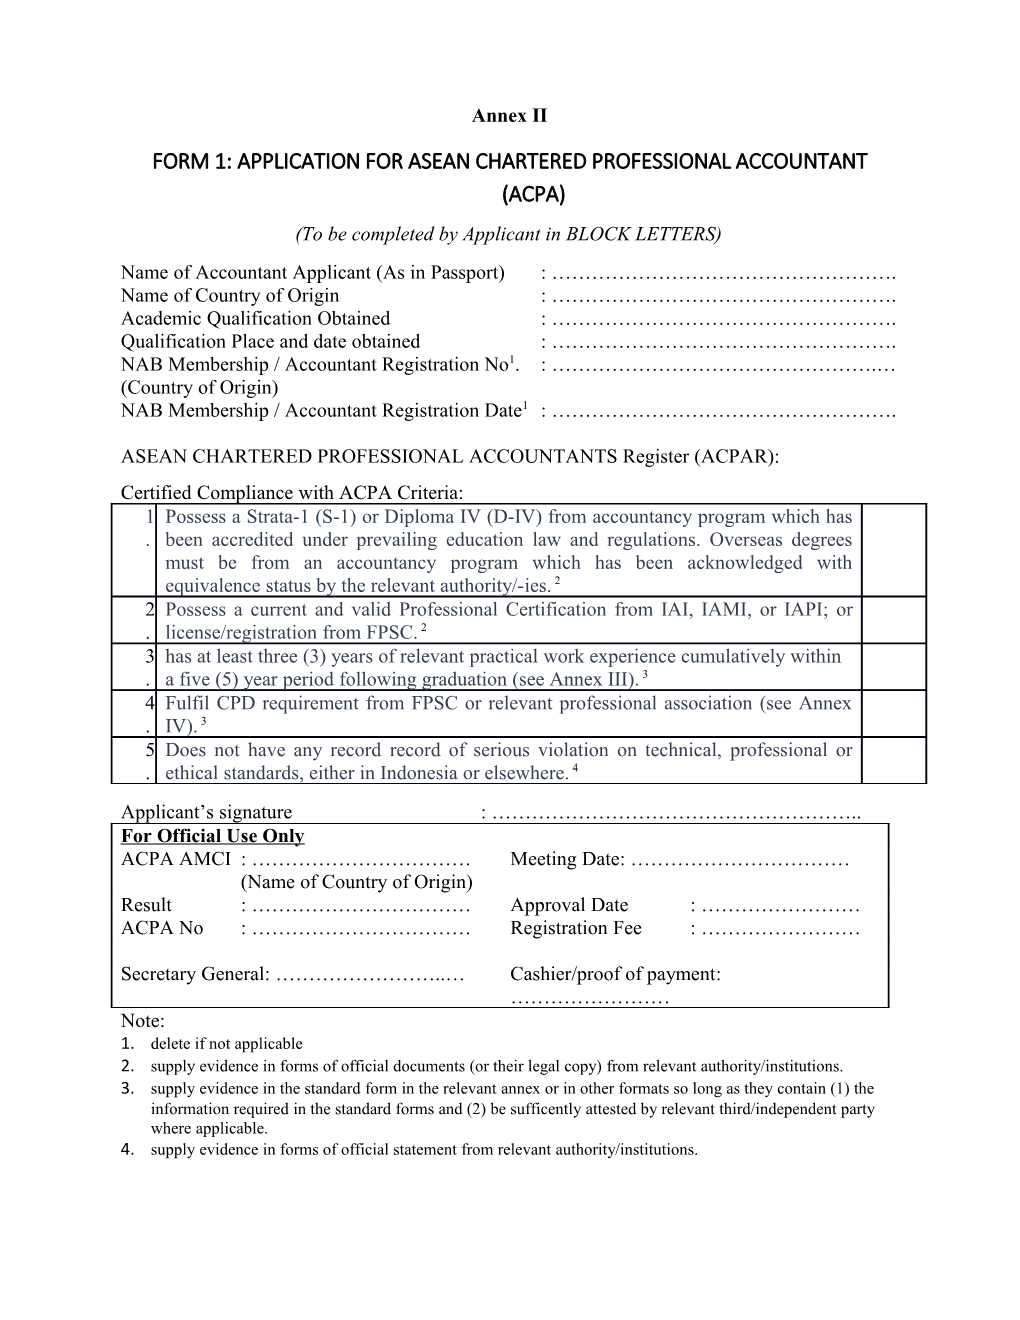 Form 1: Application for Asean Chartered Professional Accountant (Acpa)